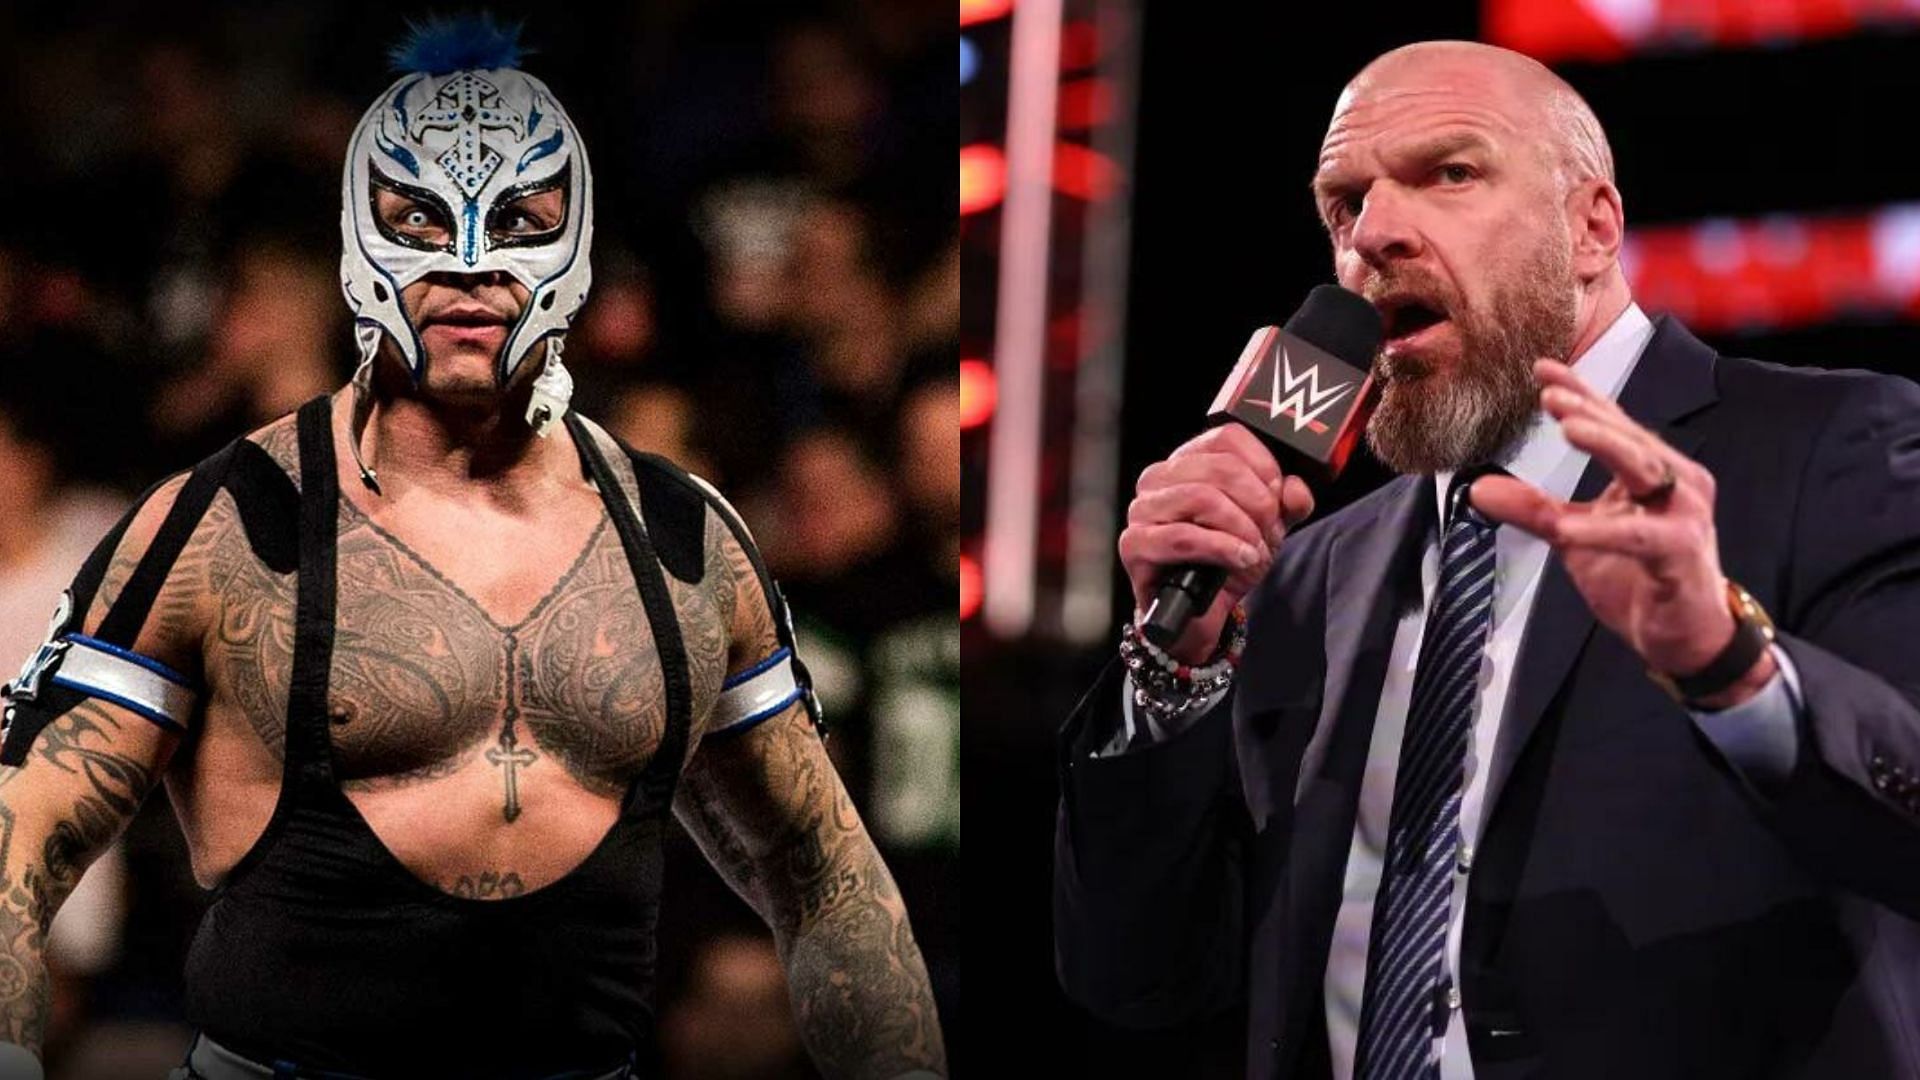 Rey Mysterio and Triple H are veterans in the wrestling industry